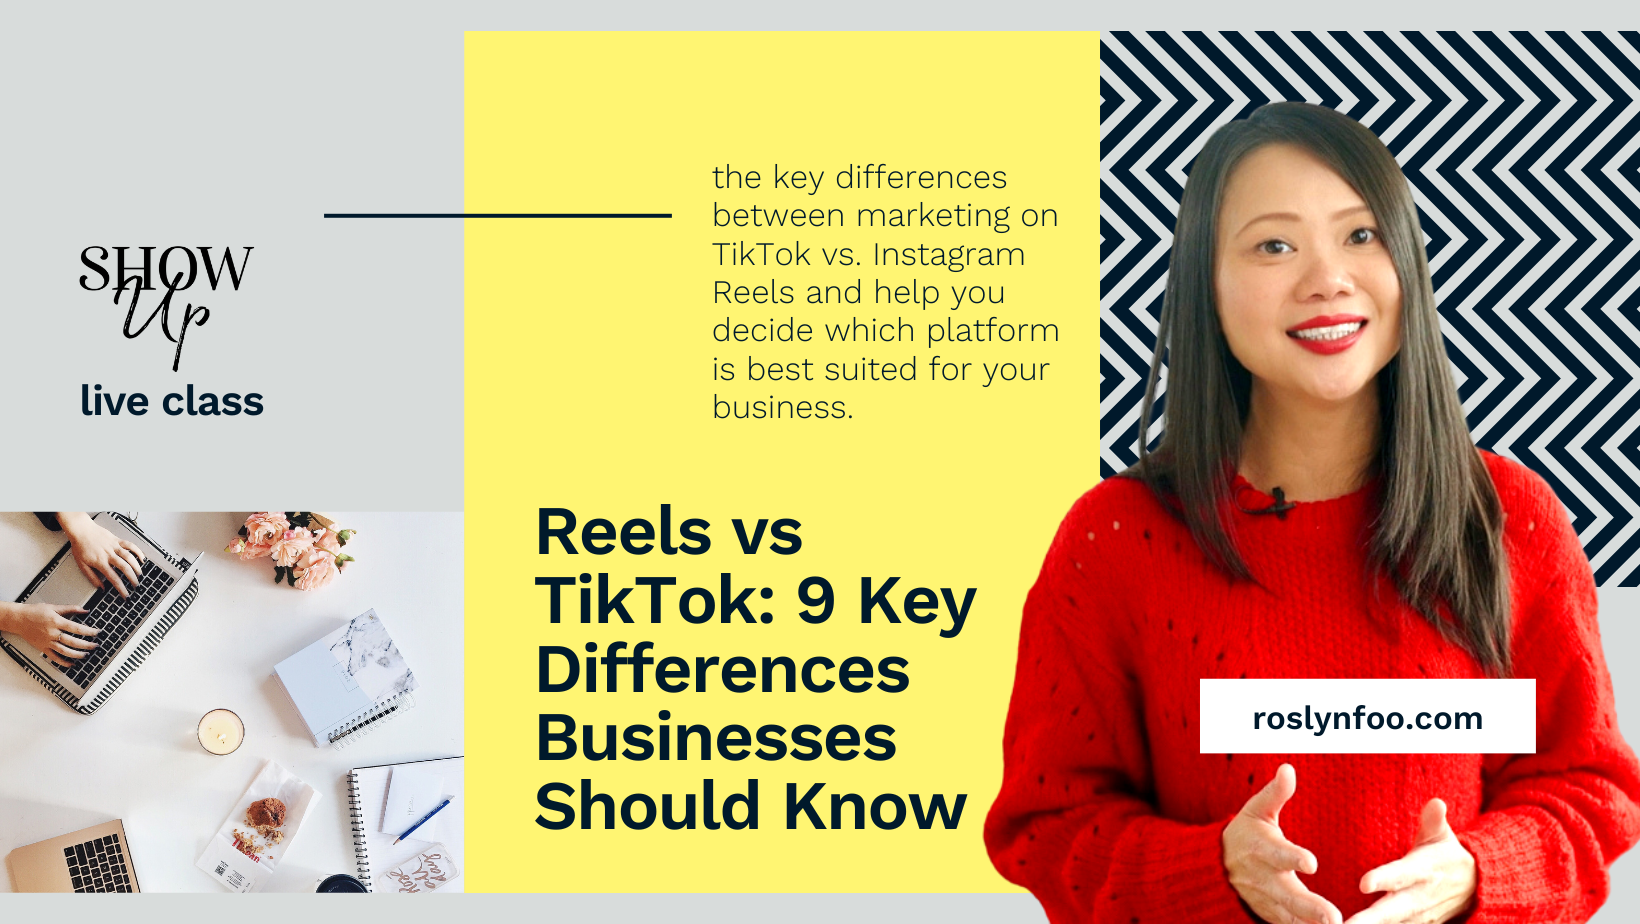 Show Up Live Class - Reels vs TikTok 9 Key Differences Businesses Should Know by Roslyn Foo